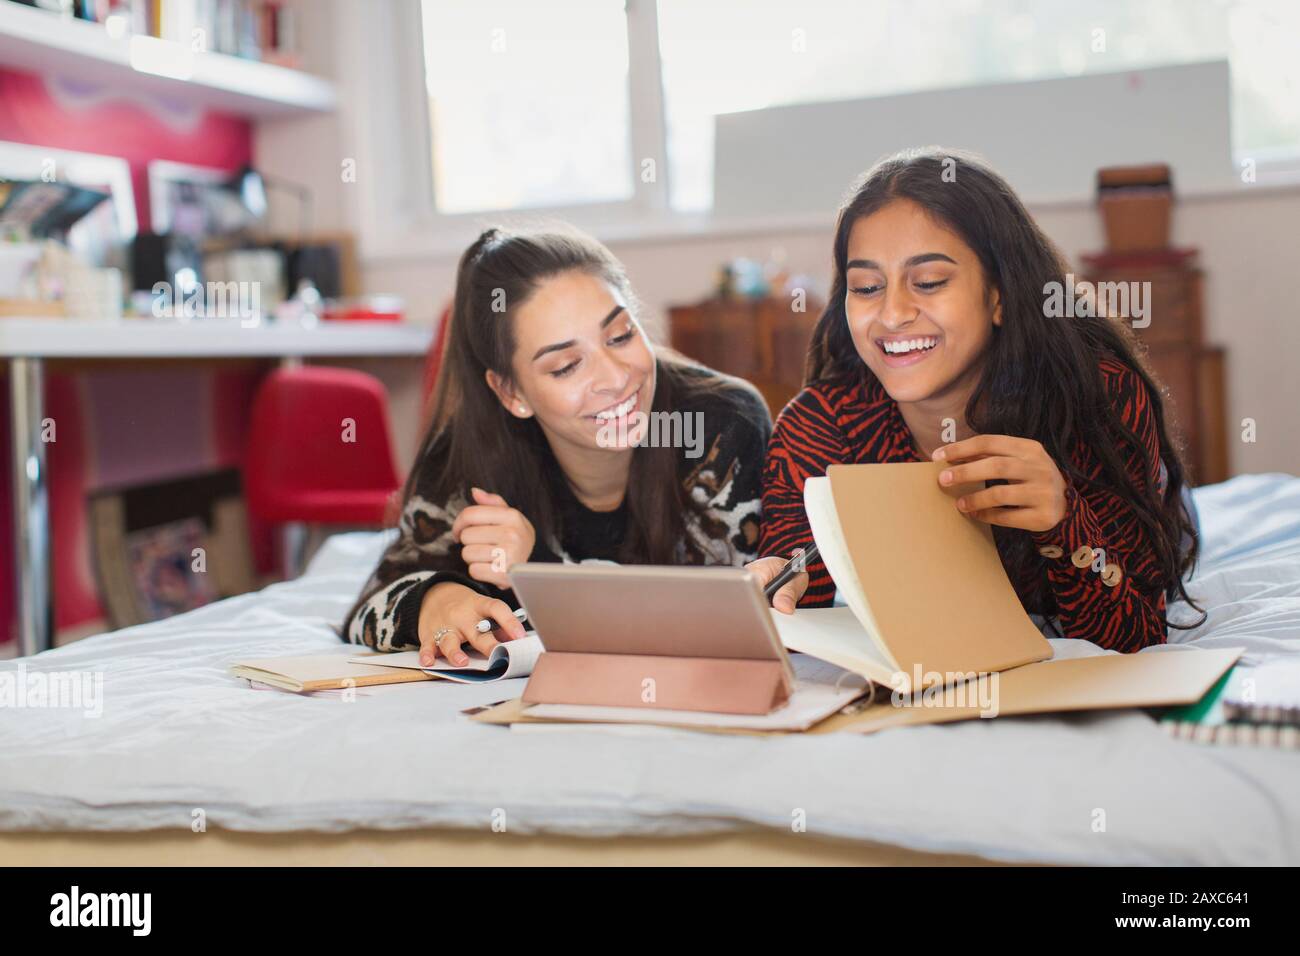 Teenage girl friends studying doing homework on bed Stock Photo